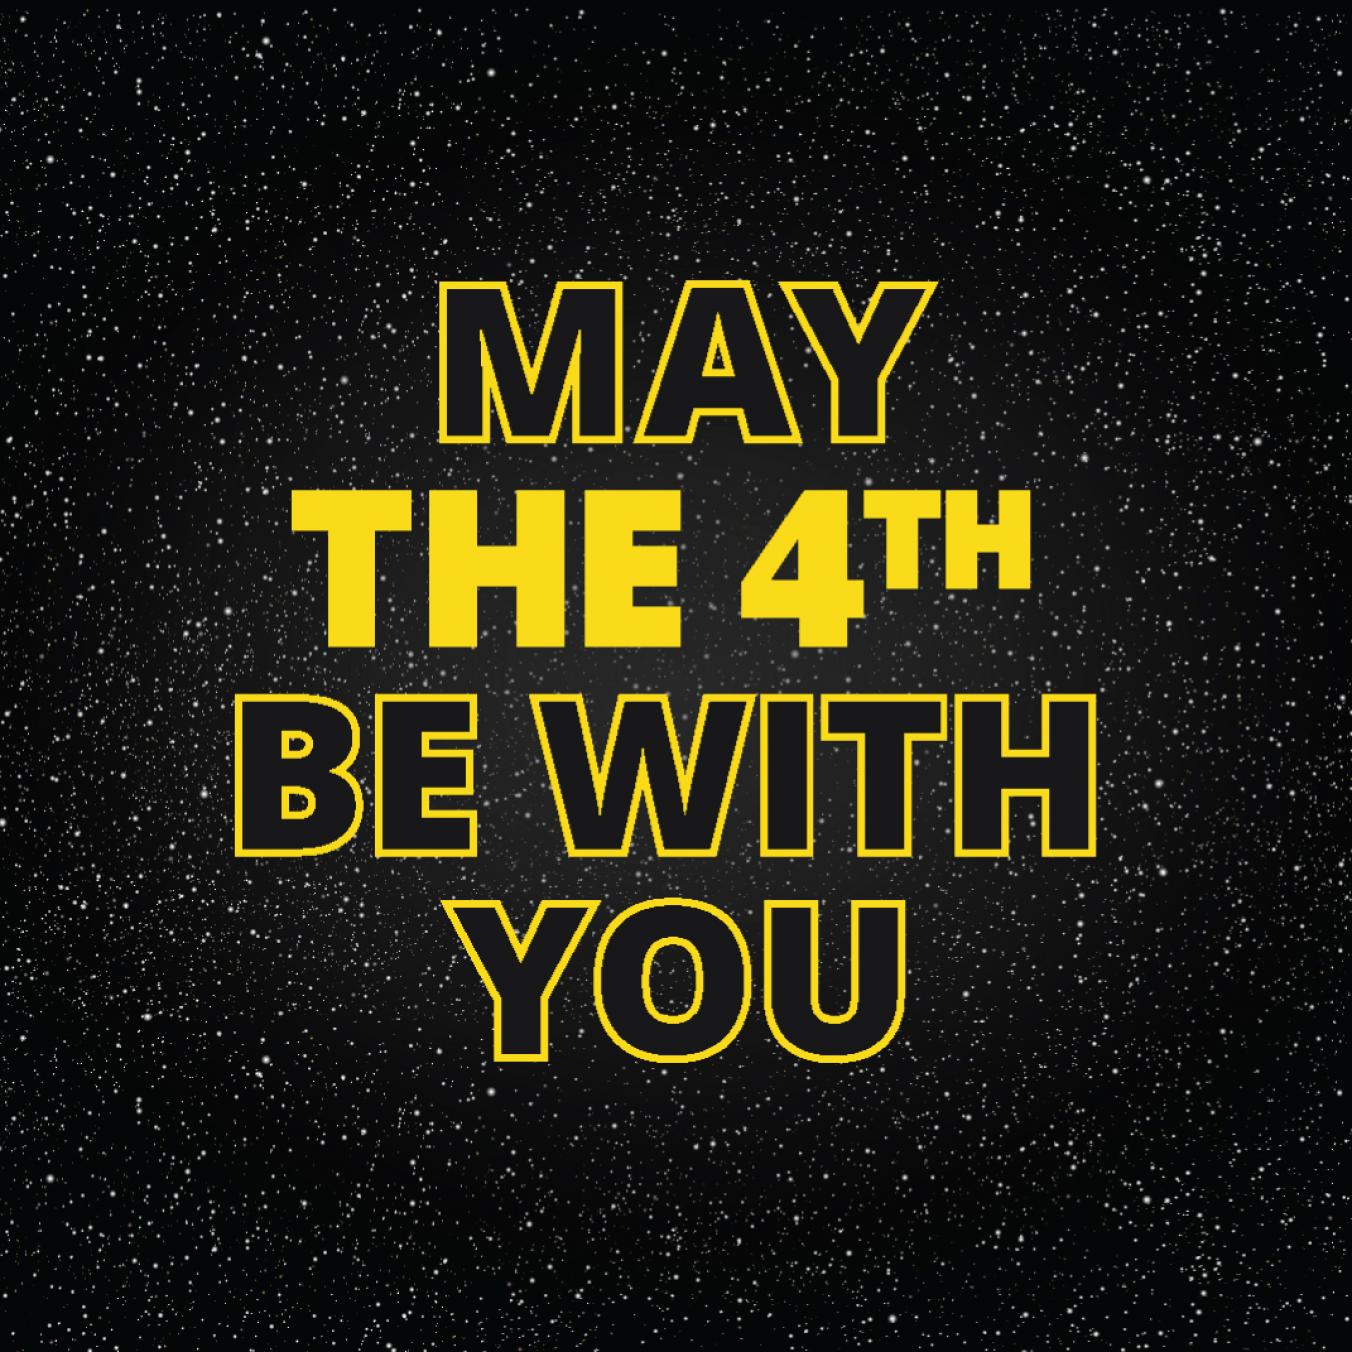 May the 4th Be With YOU!